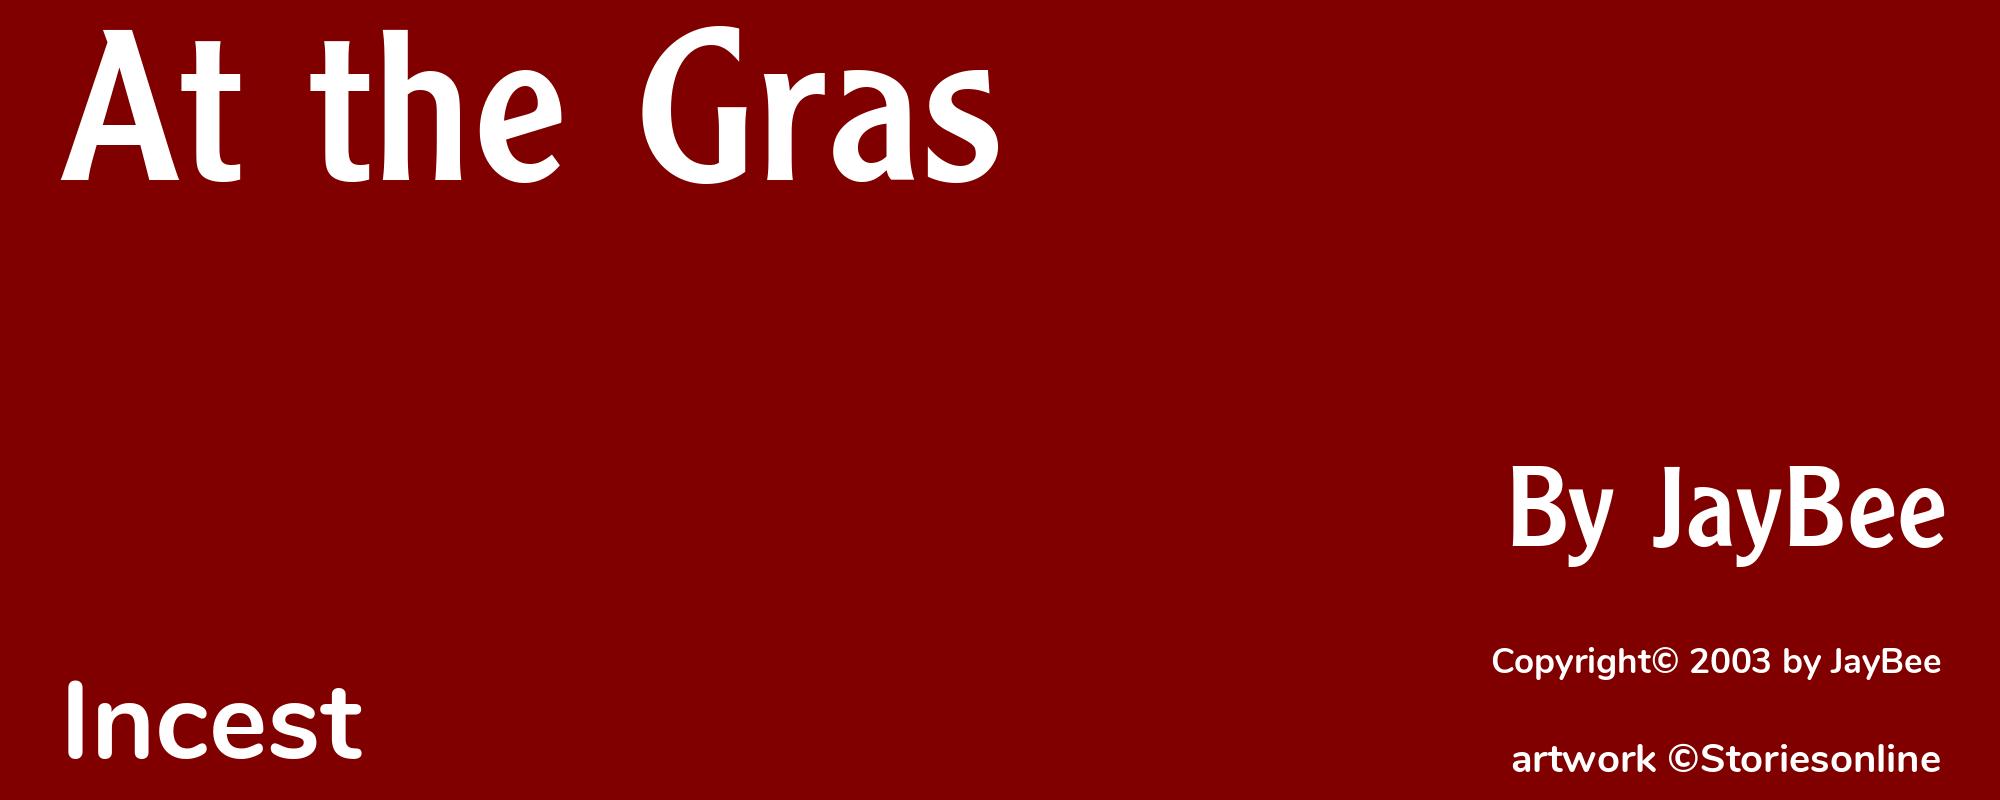 At the Gras - Cover